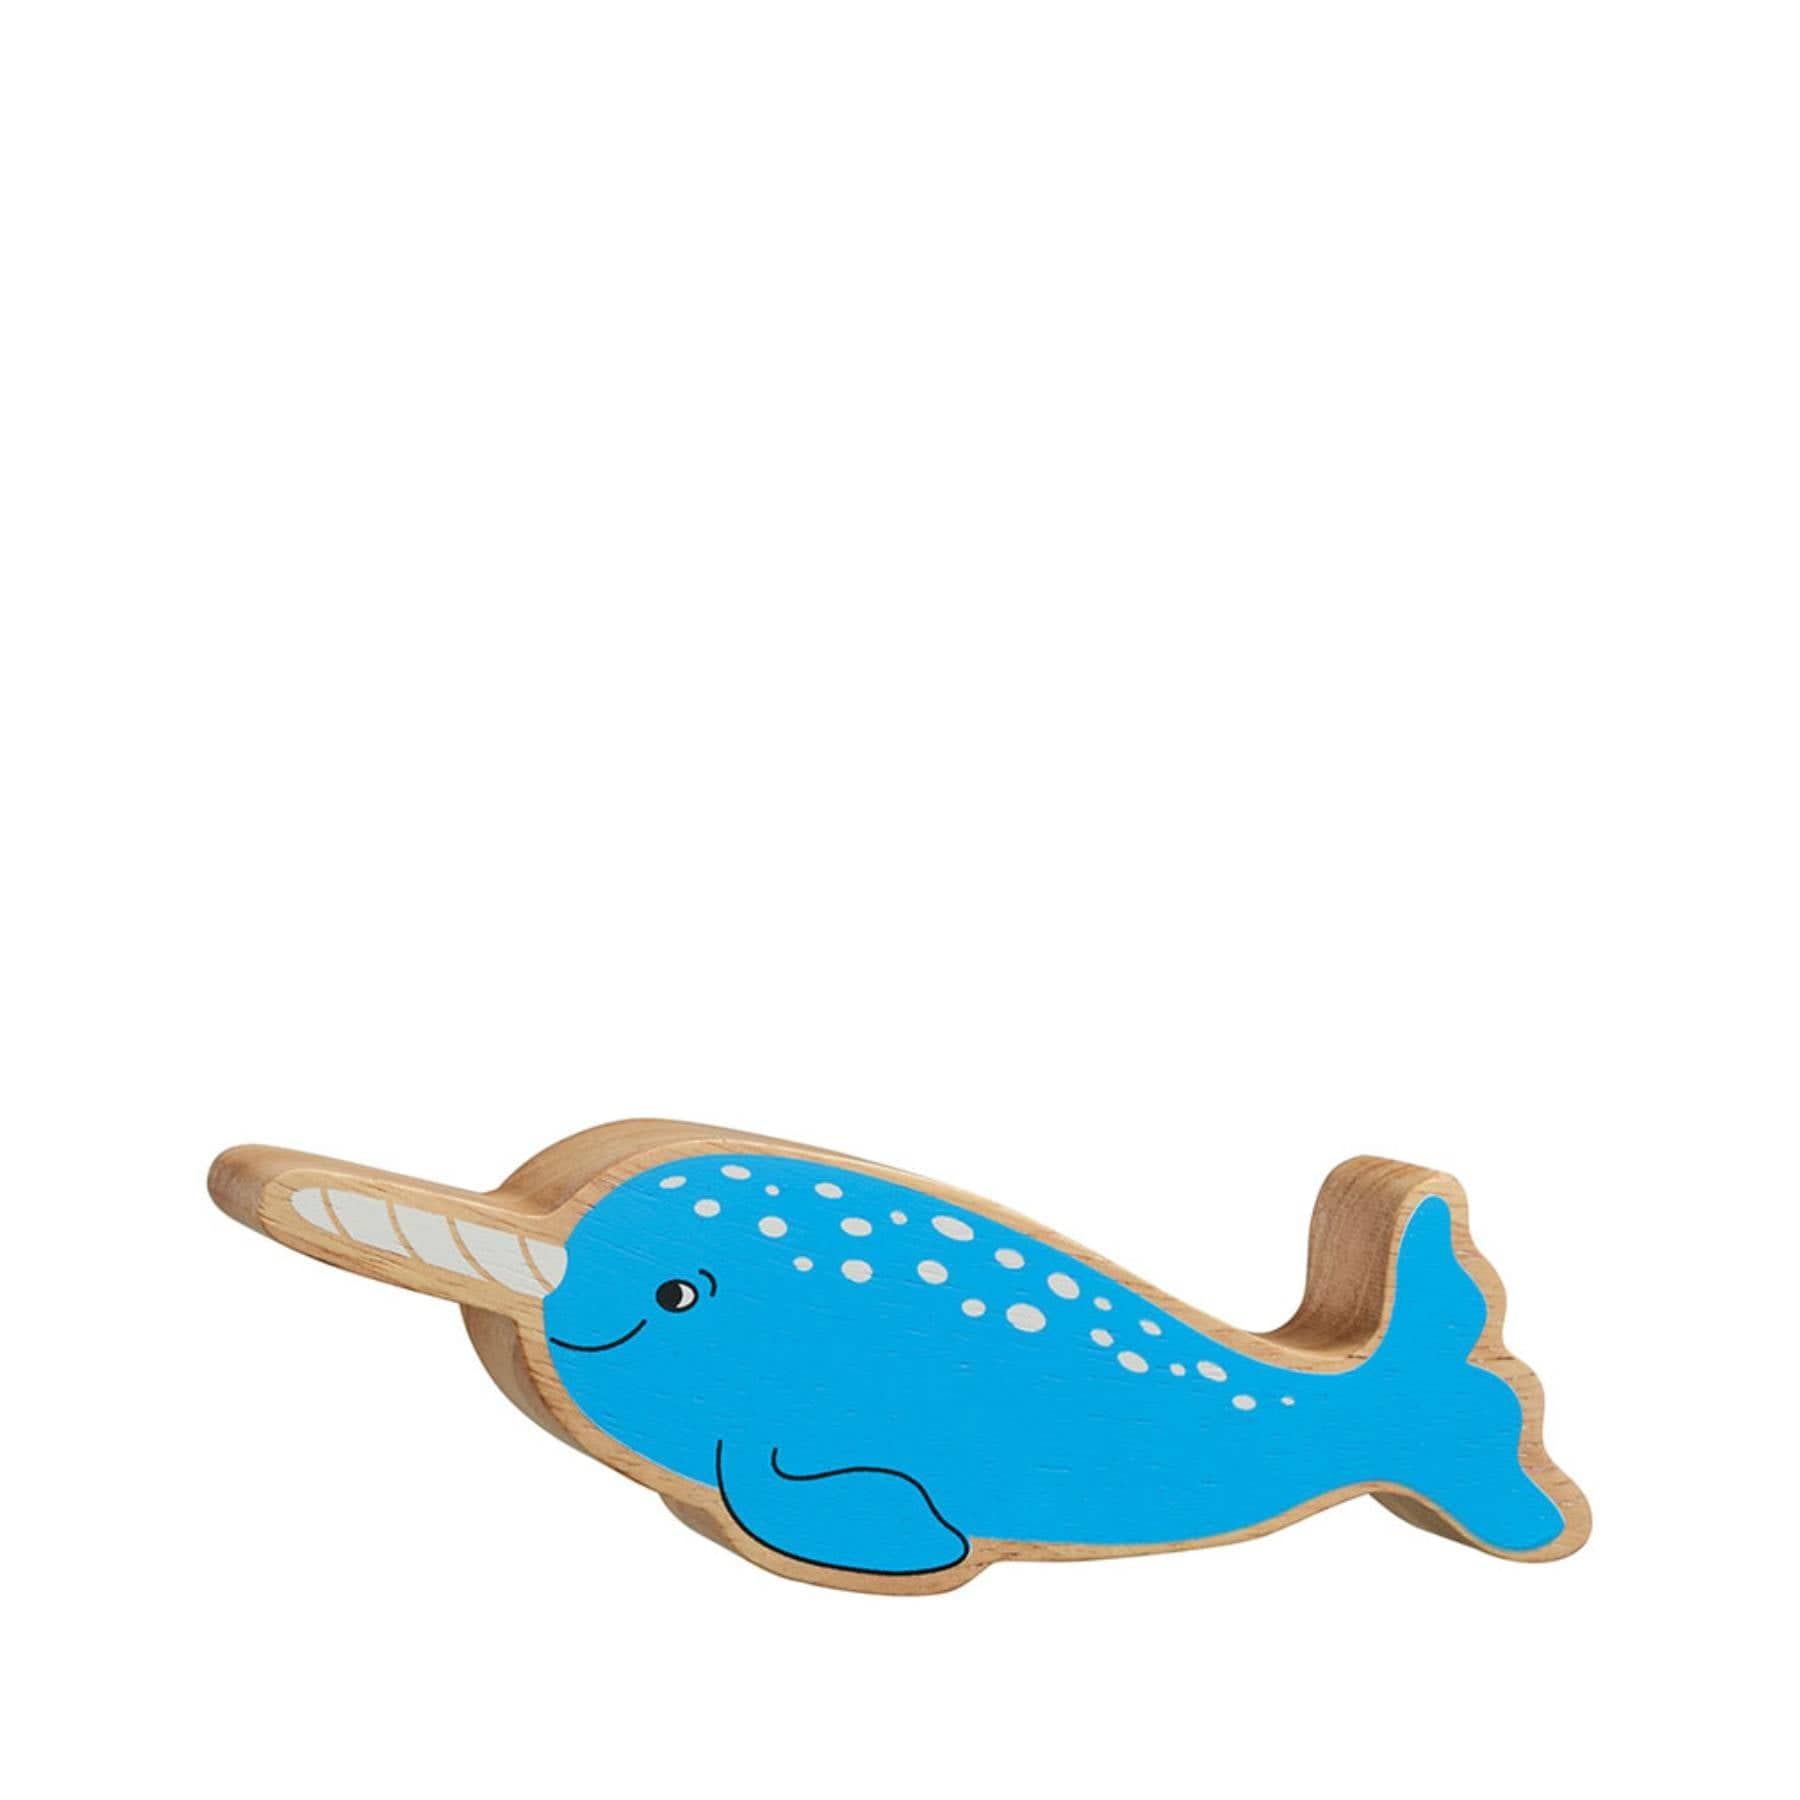 Wooden narwhal figure